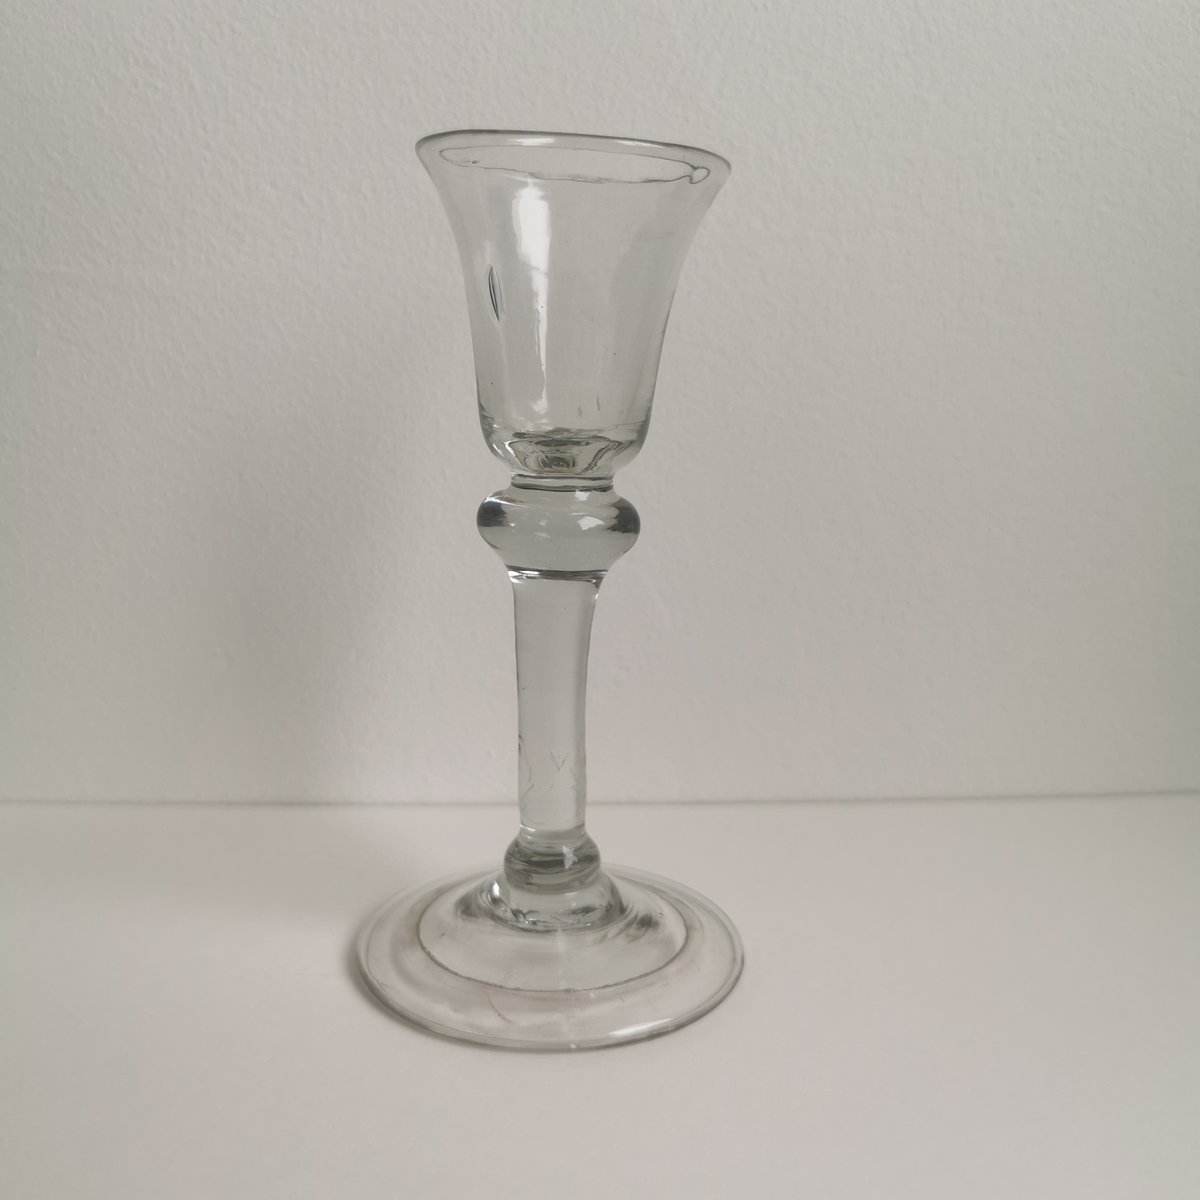 Image of Antique Georgian Balustroid Folded Foot Cordial Glass c1740s